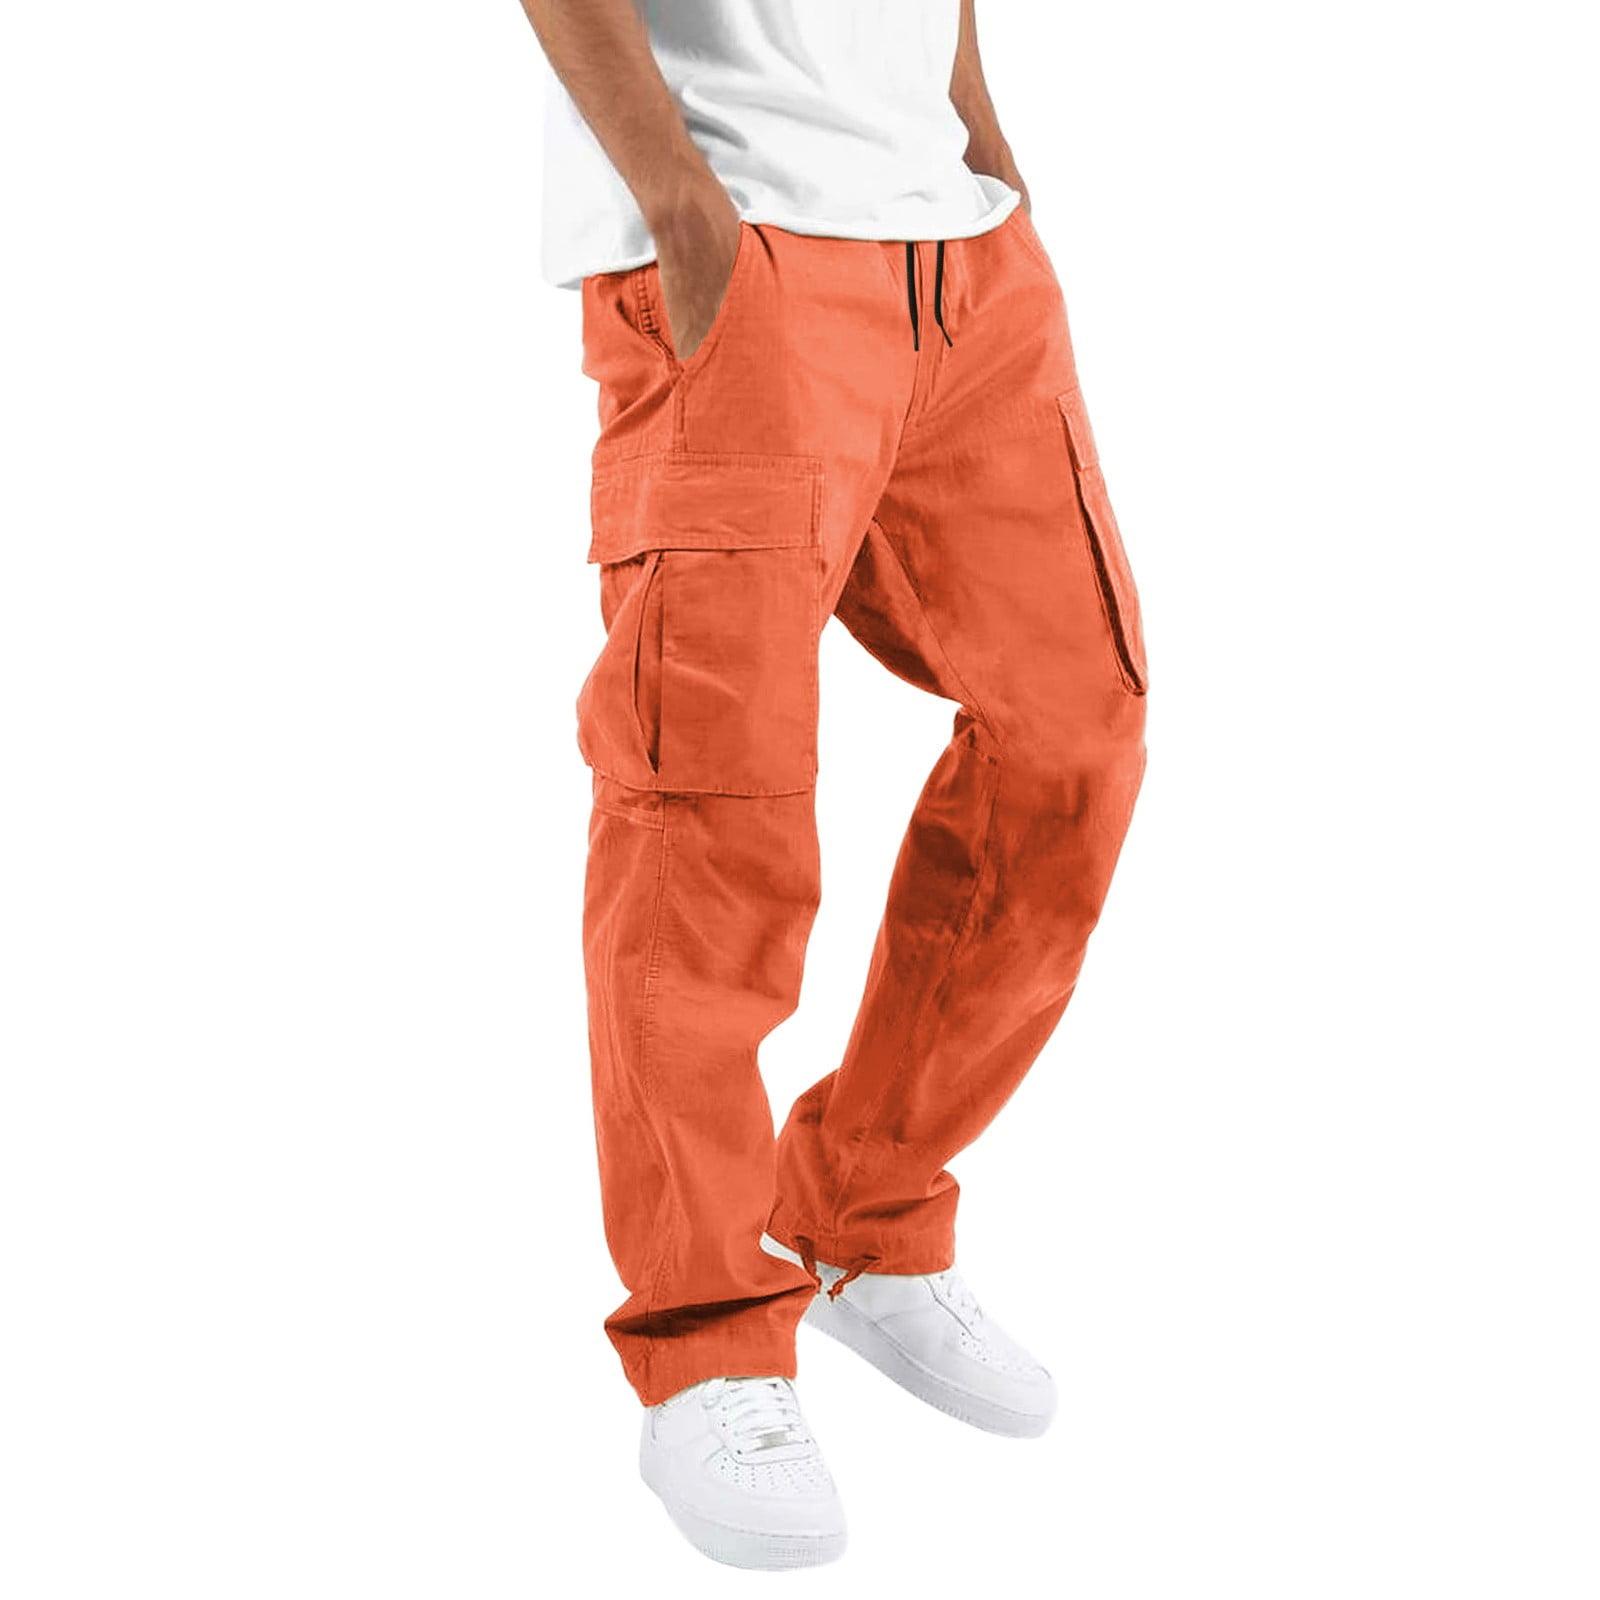 Cargo Pants, Cargo Pant for Men, Pocket Cargo Pant, Polyester Cargo Pant,  कार्गो पैंट - Star Traders, Visakhapatnam | ID: 2851813615433